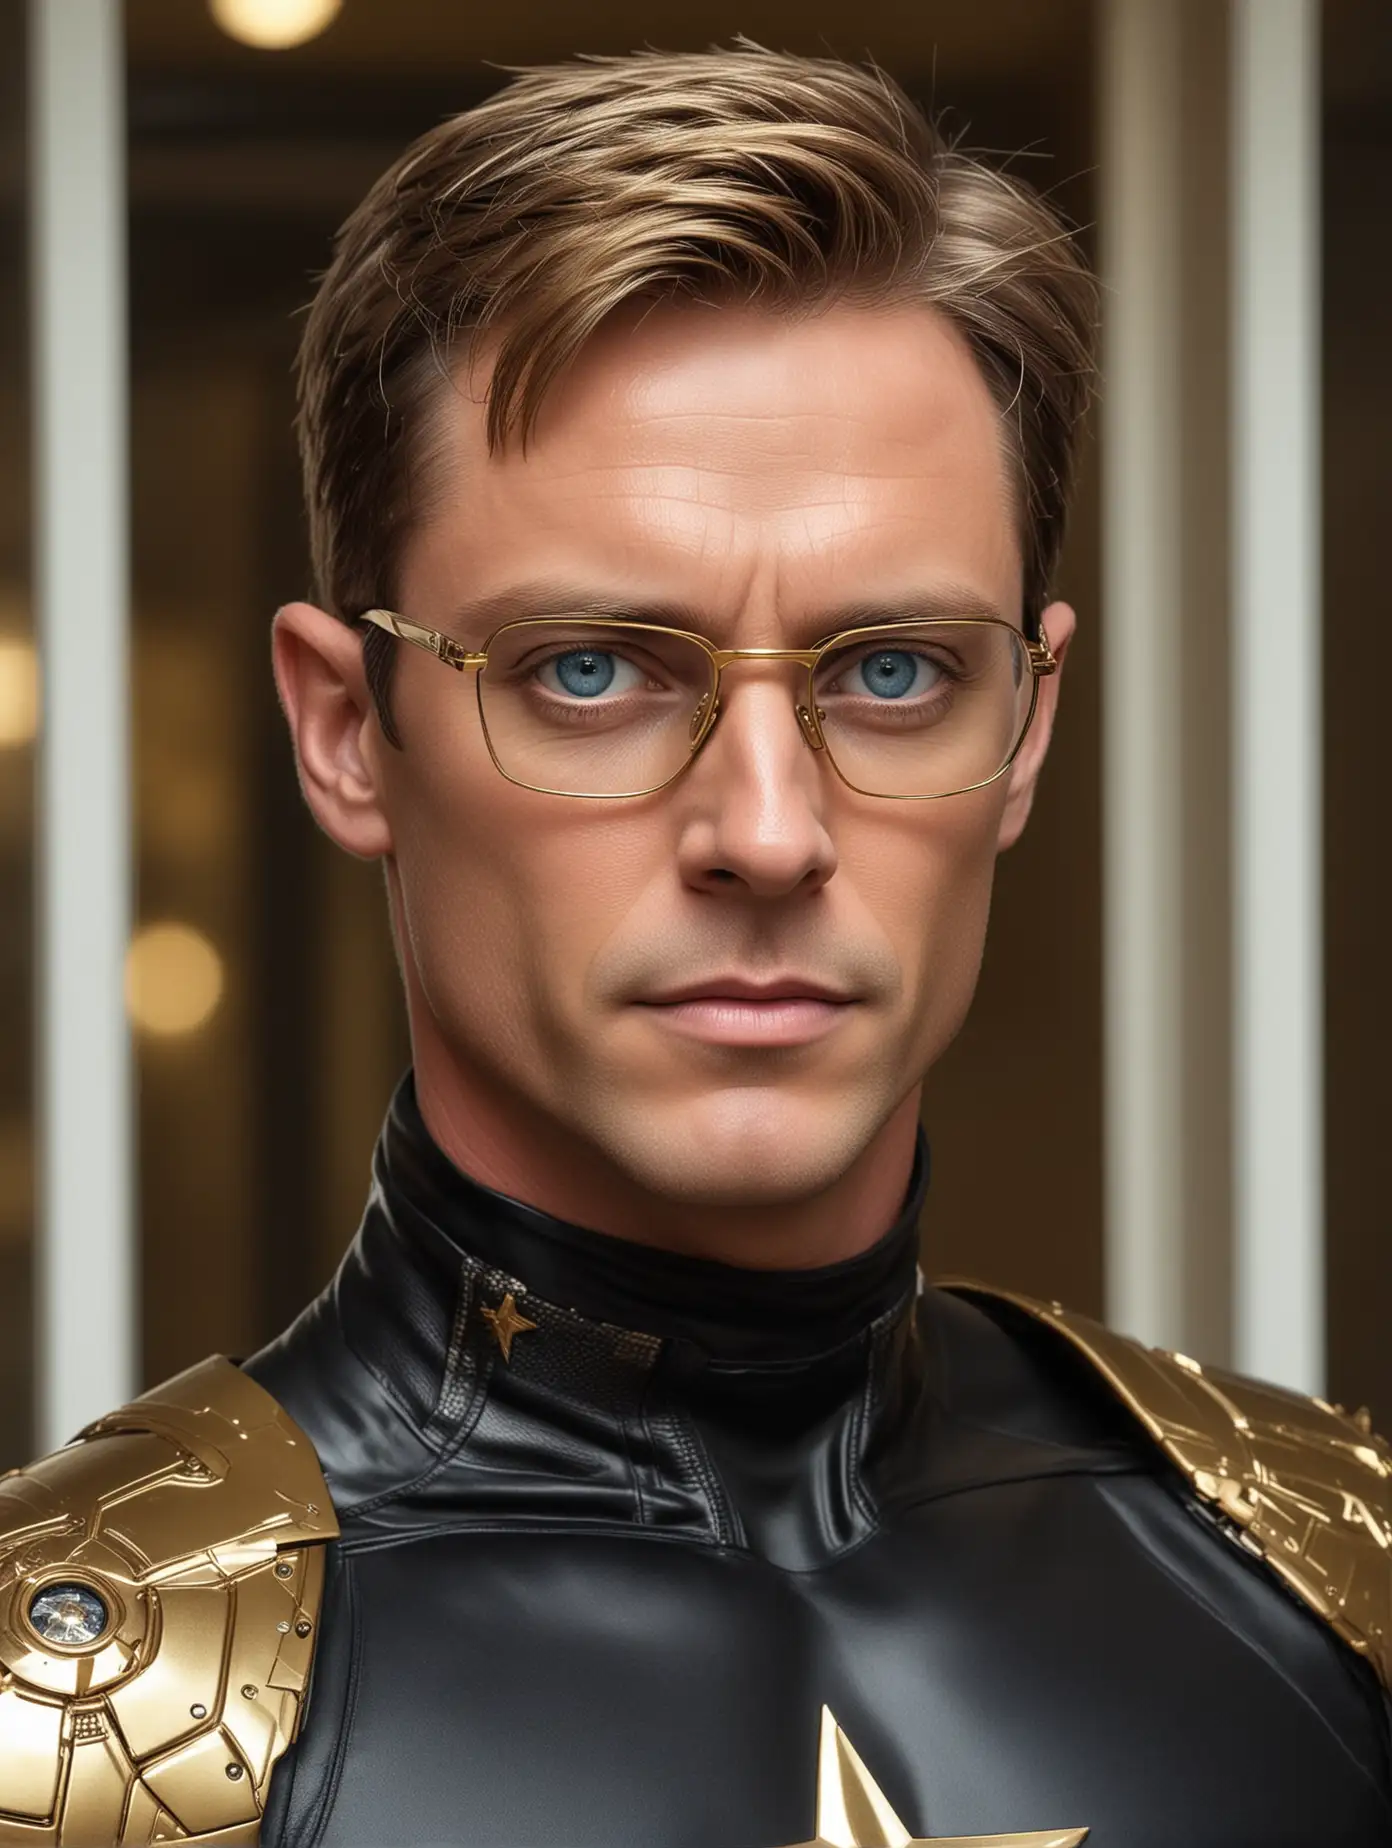 A handsome and well-built body man with a fair complexion. This summer beauty. About 40 years old. Blue eyes with gold space glasses. Short, styled dark blonde hair. Light, short stubble. Square face and serious expression looks out the window. Dressed in a black bionic outfit from another planet with a gold star on his shoulder.